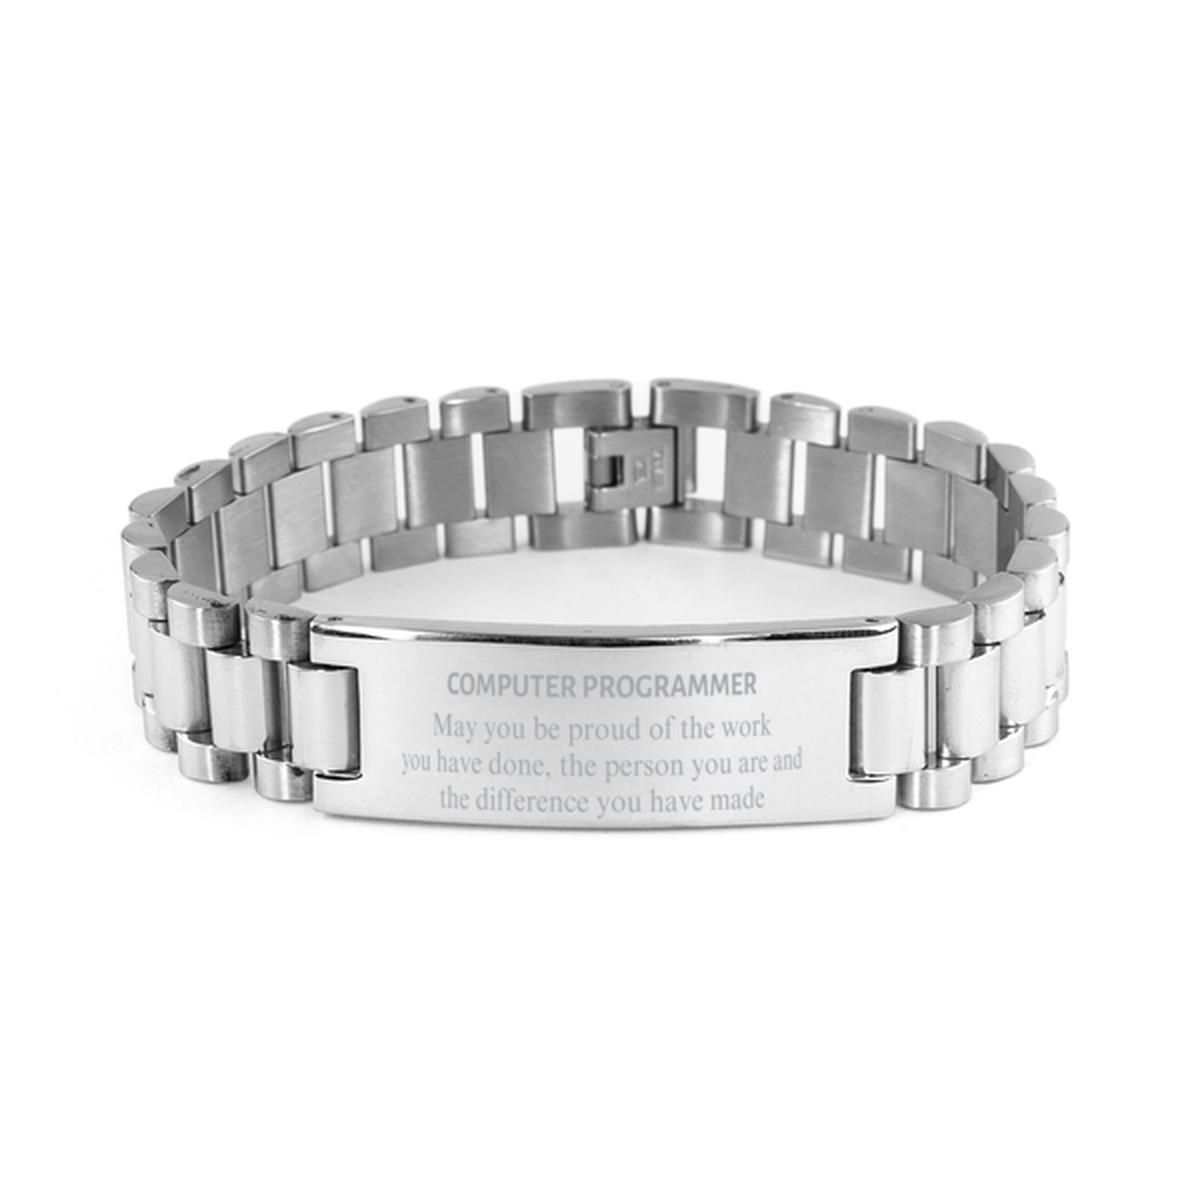 Computer Programmer May you be proud of the work you have done, Retirement Computer Programmer Ladder Stainless Steel Bracelet for Colleague Appreciation Gifts Amazing for Computer Programmer